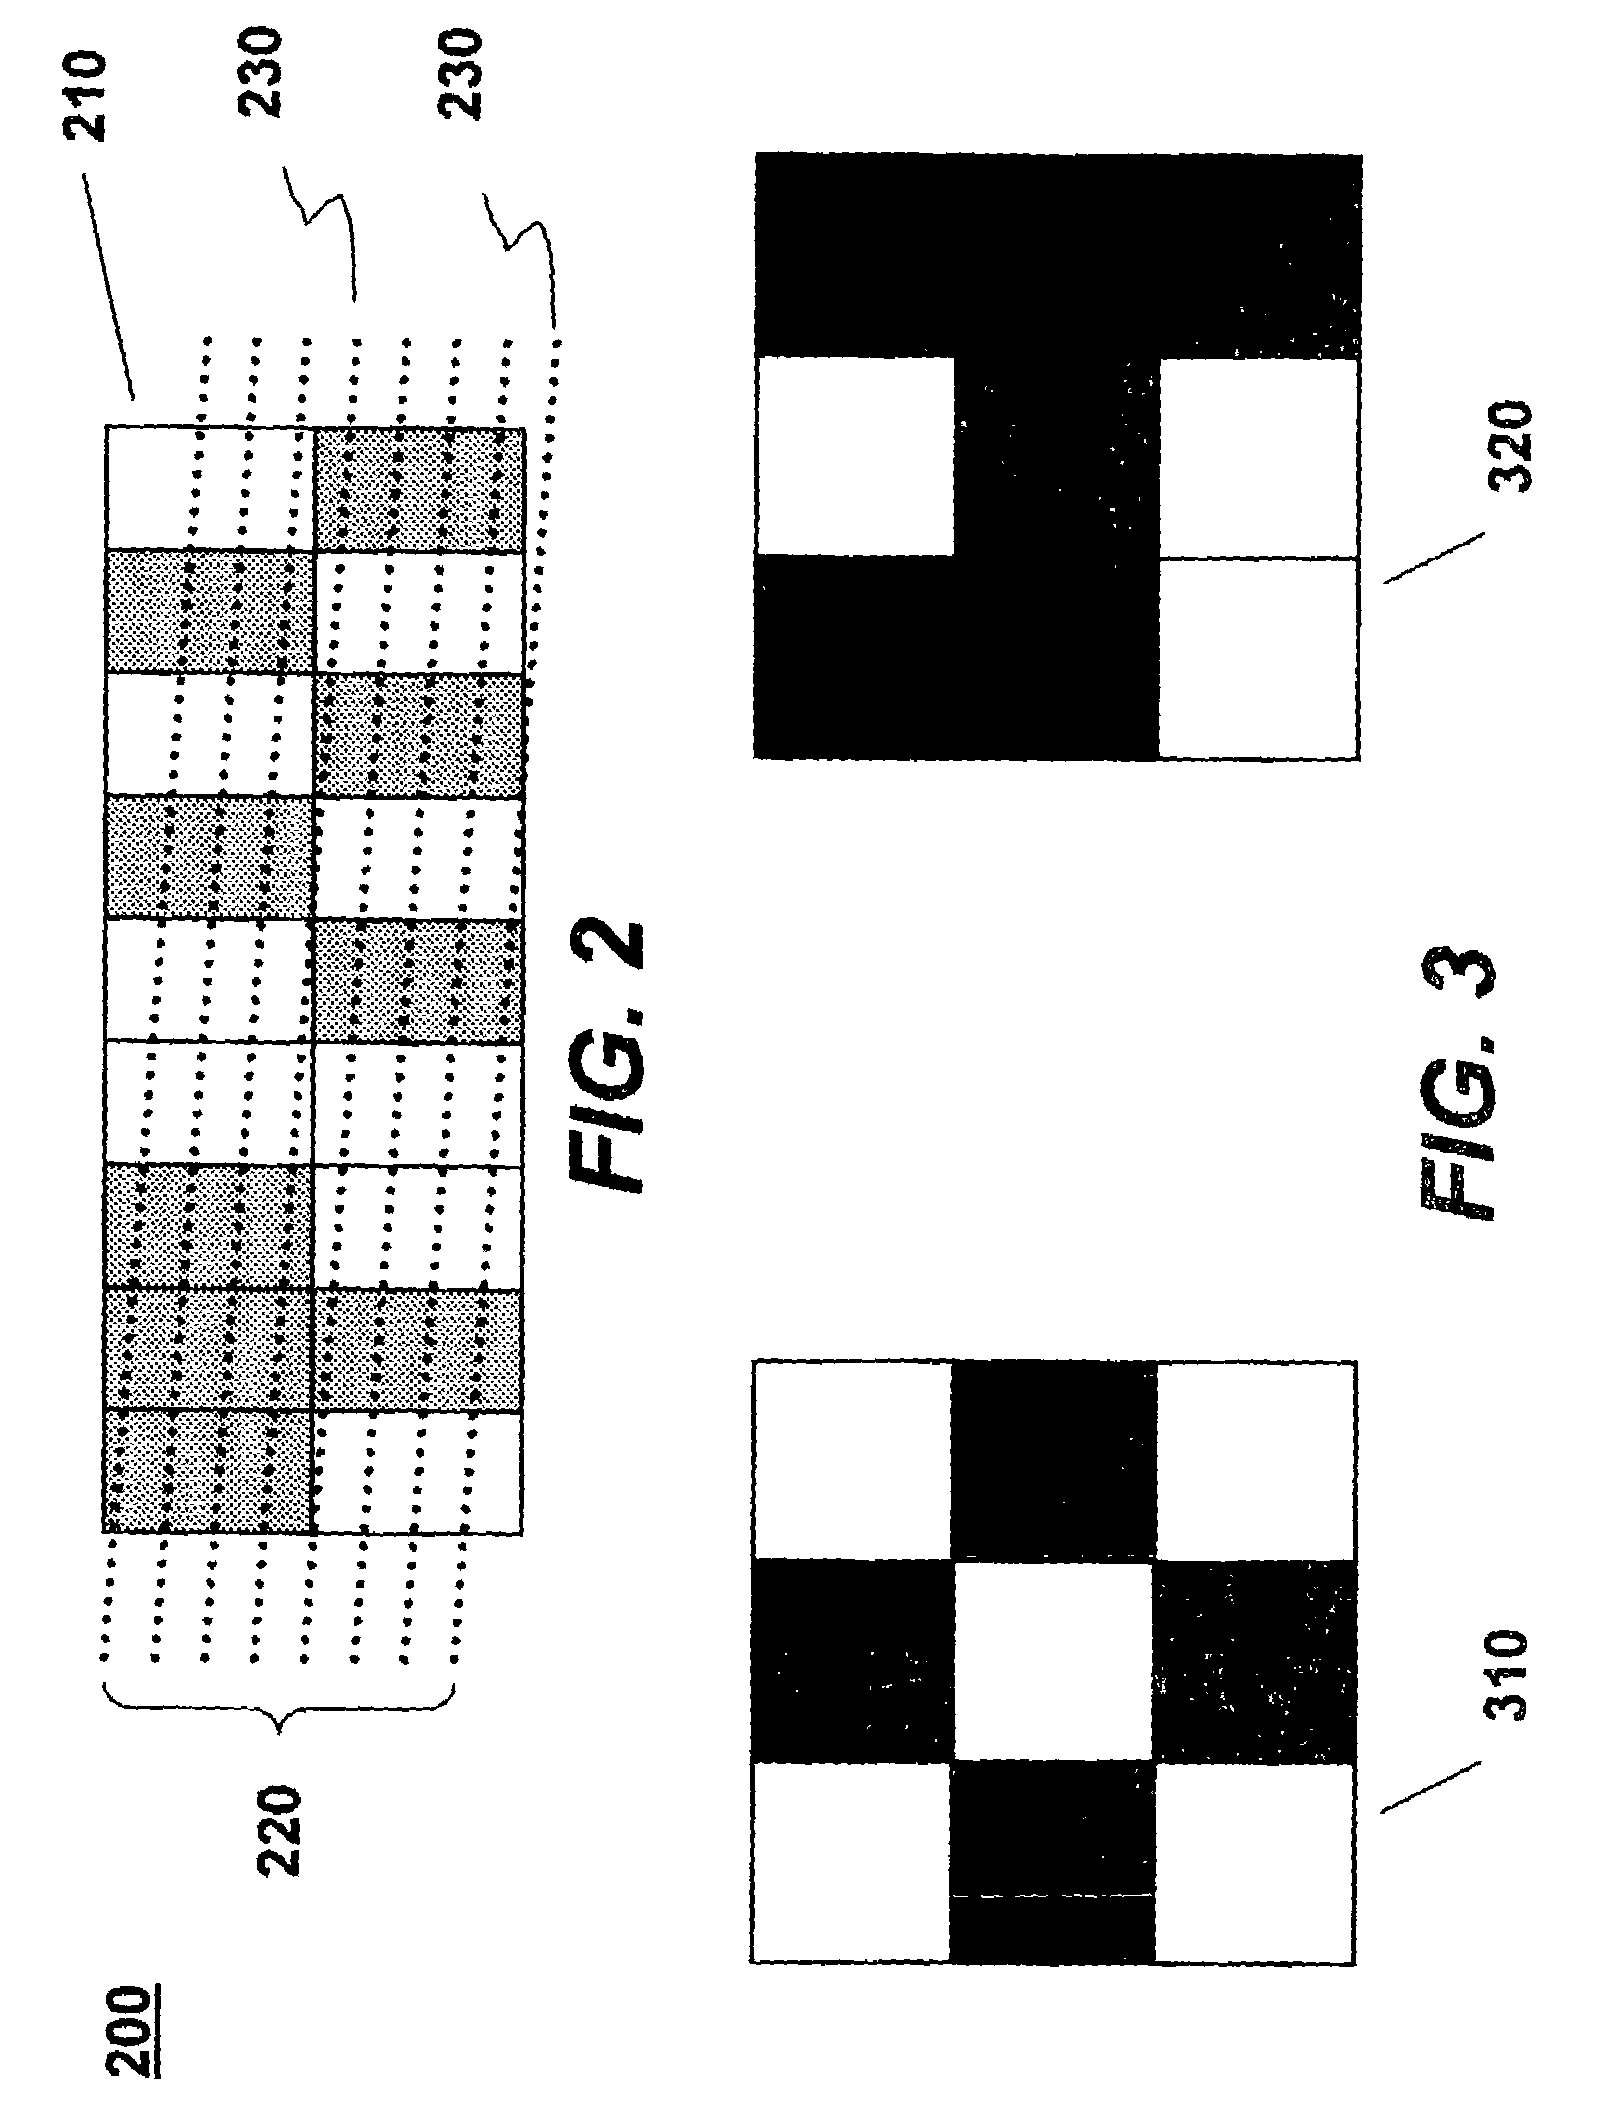 Methods and systems for encoding and decoding data in 2D symbology